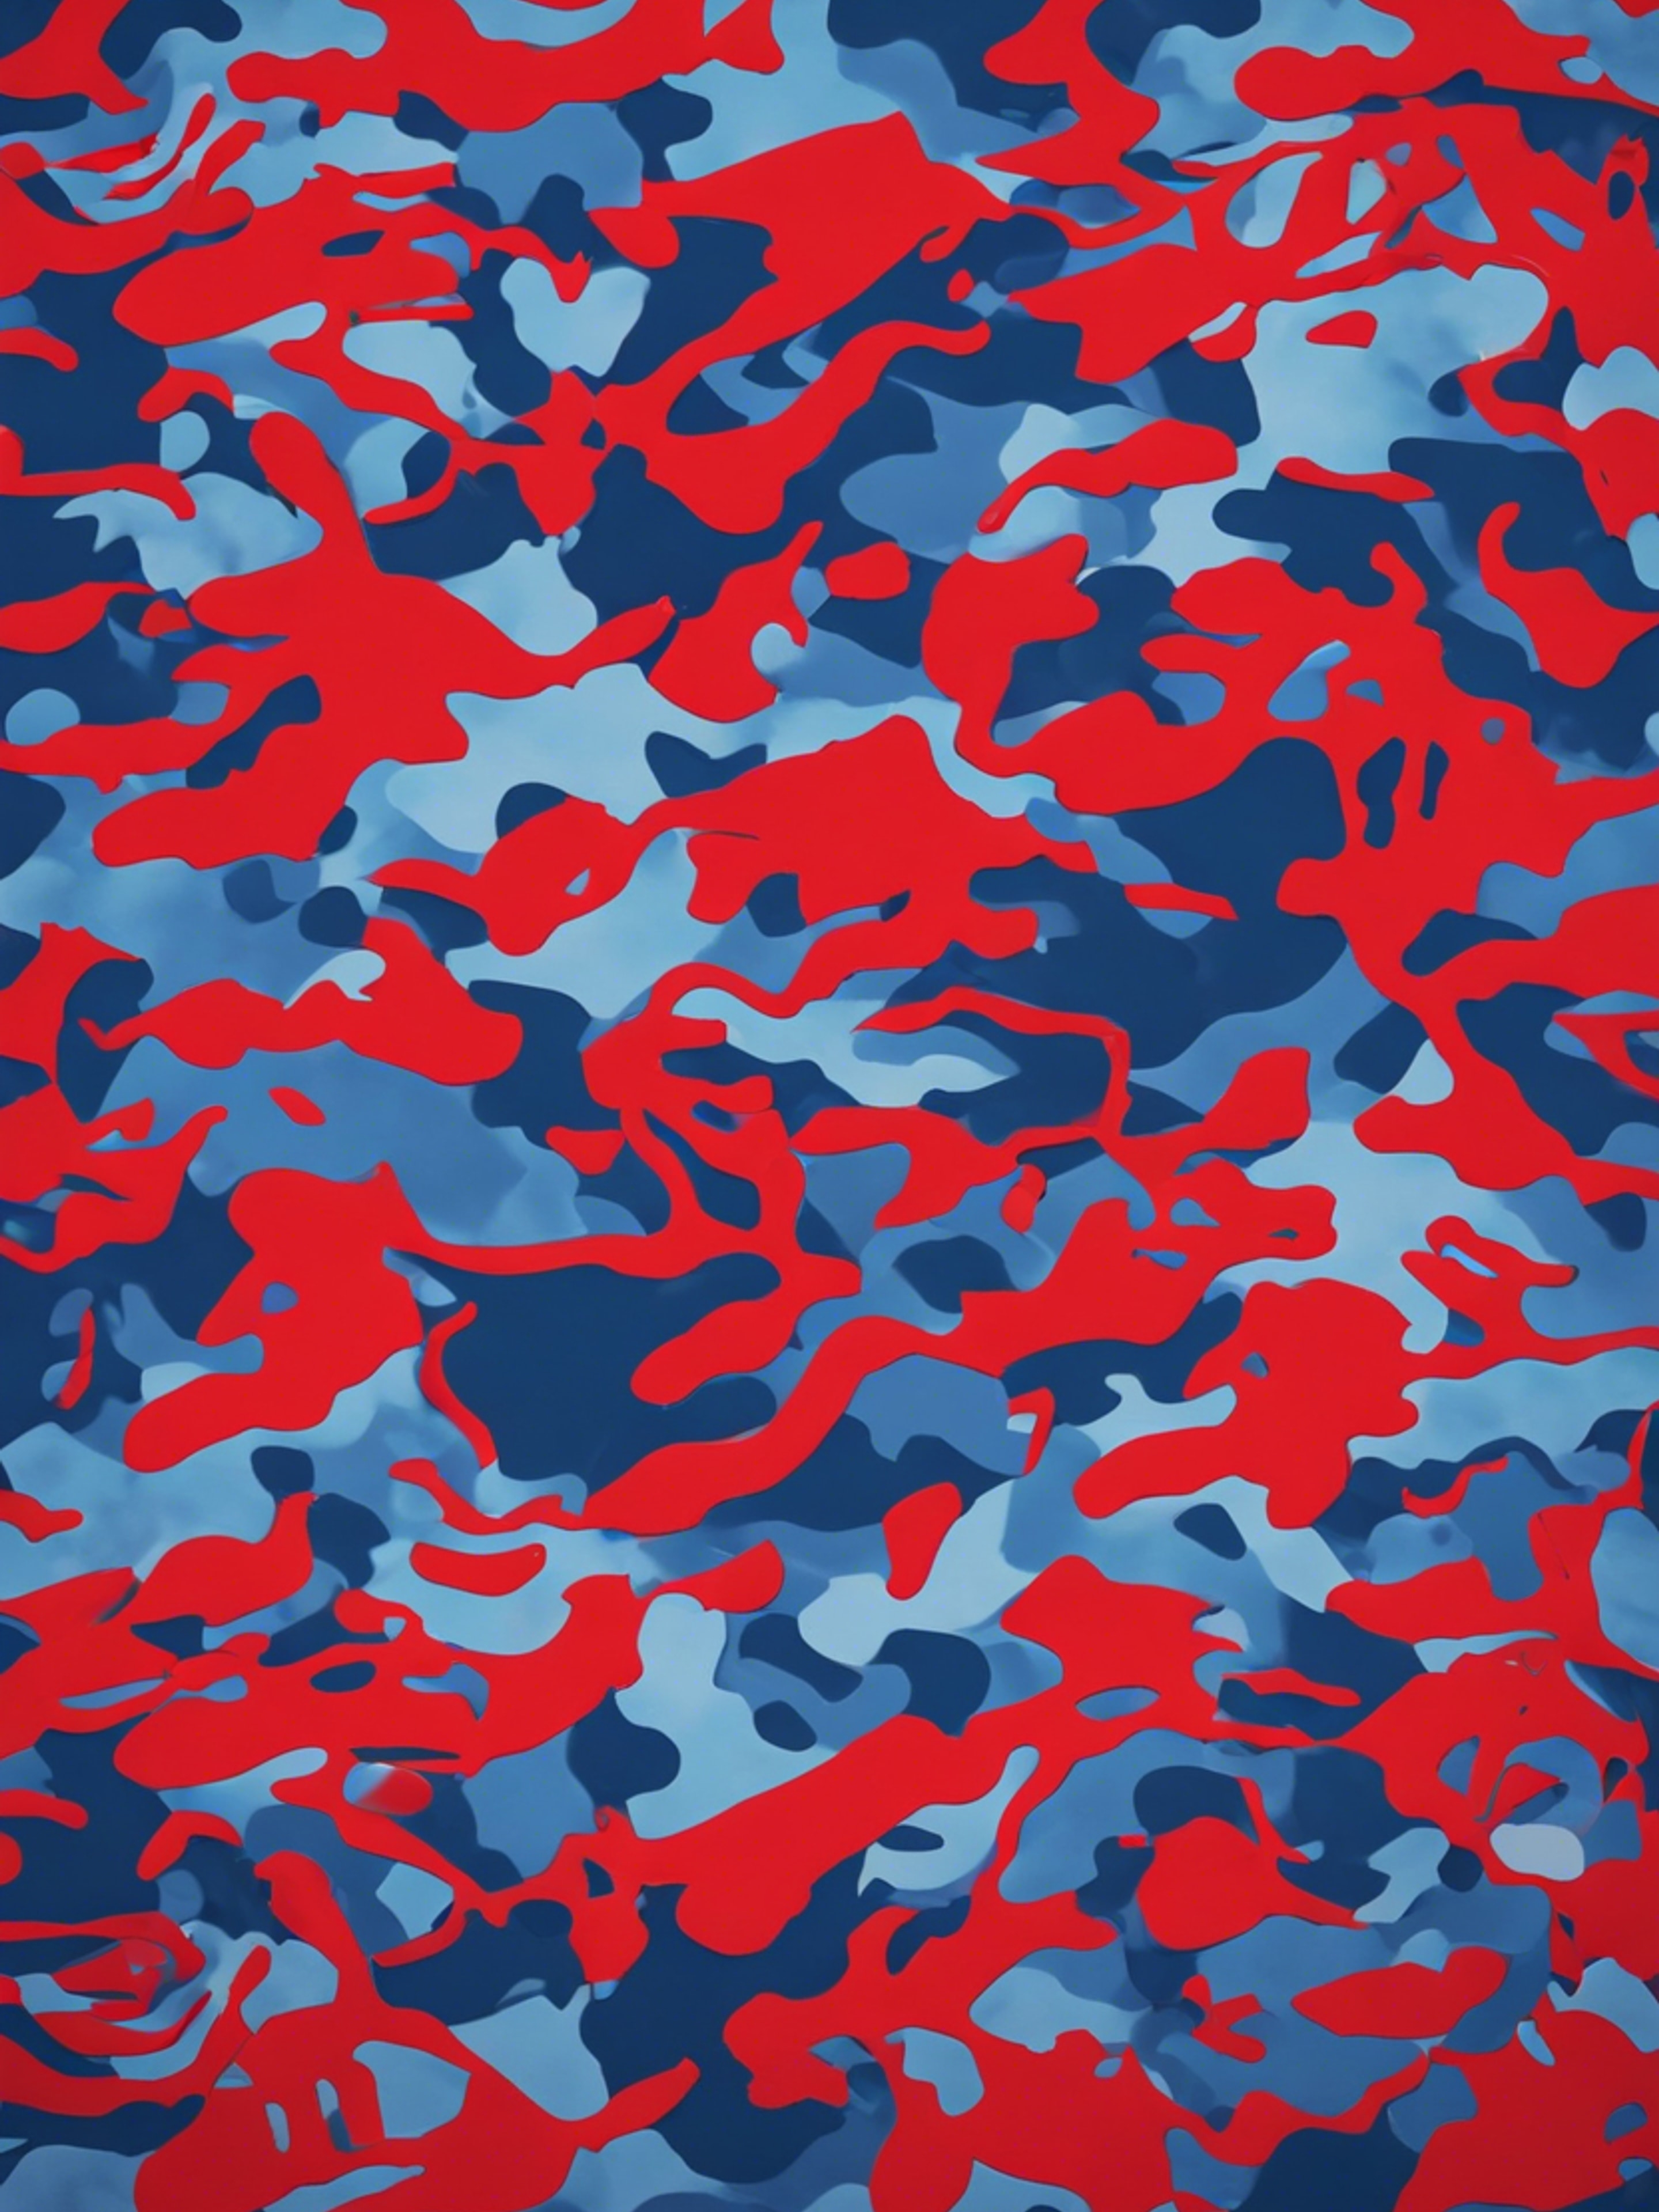 Vintage styled red and blue camouflage pattern. ورق الجدران[fee228e6ab6649a28dfc]